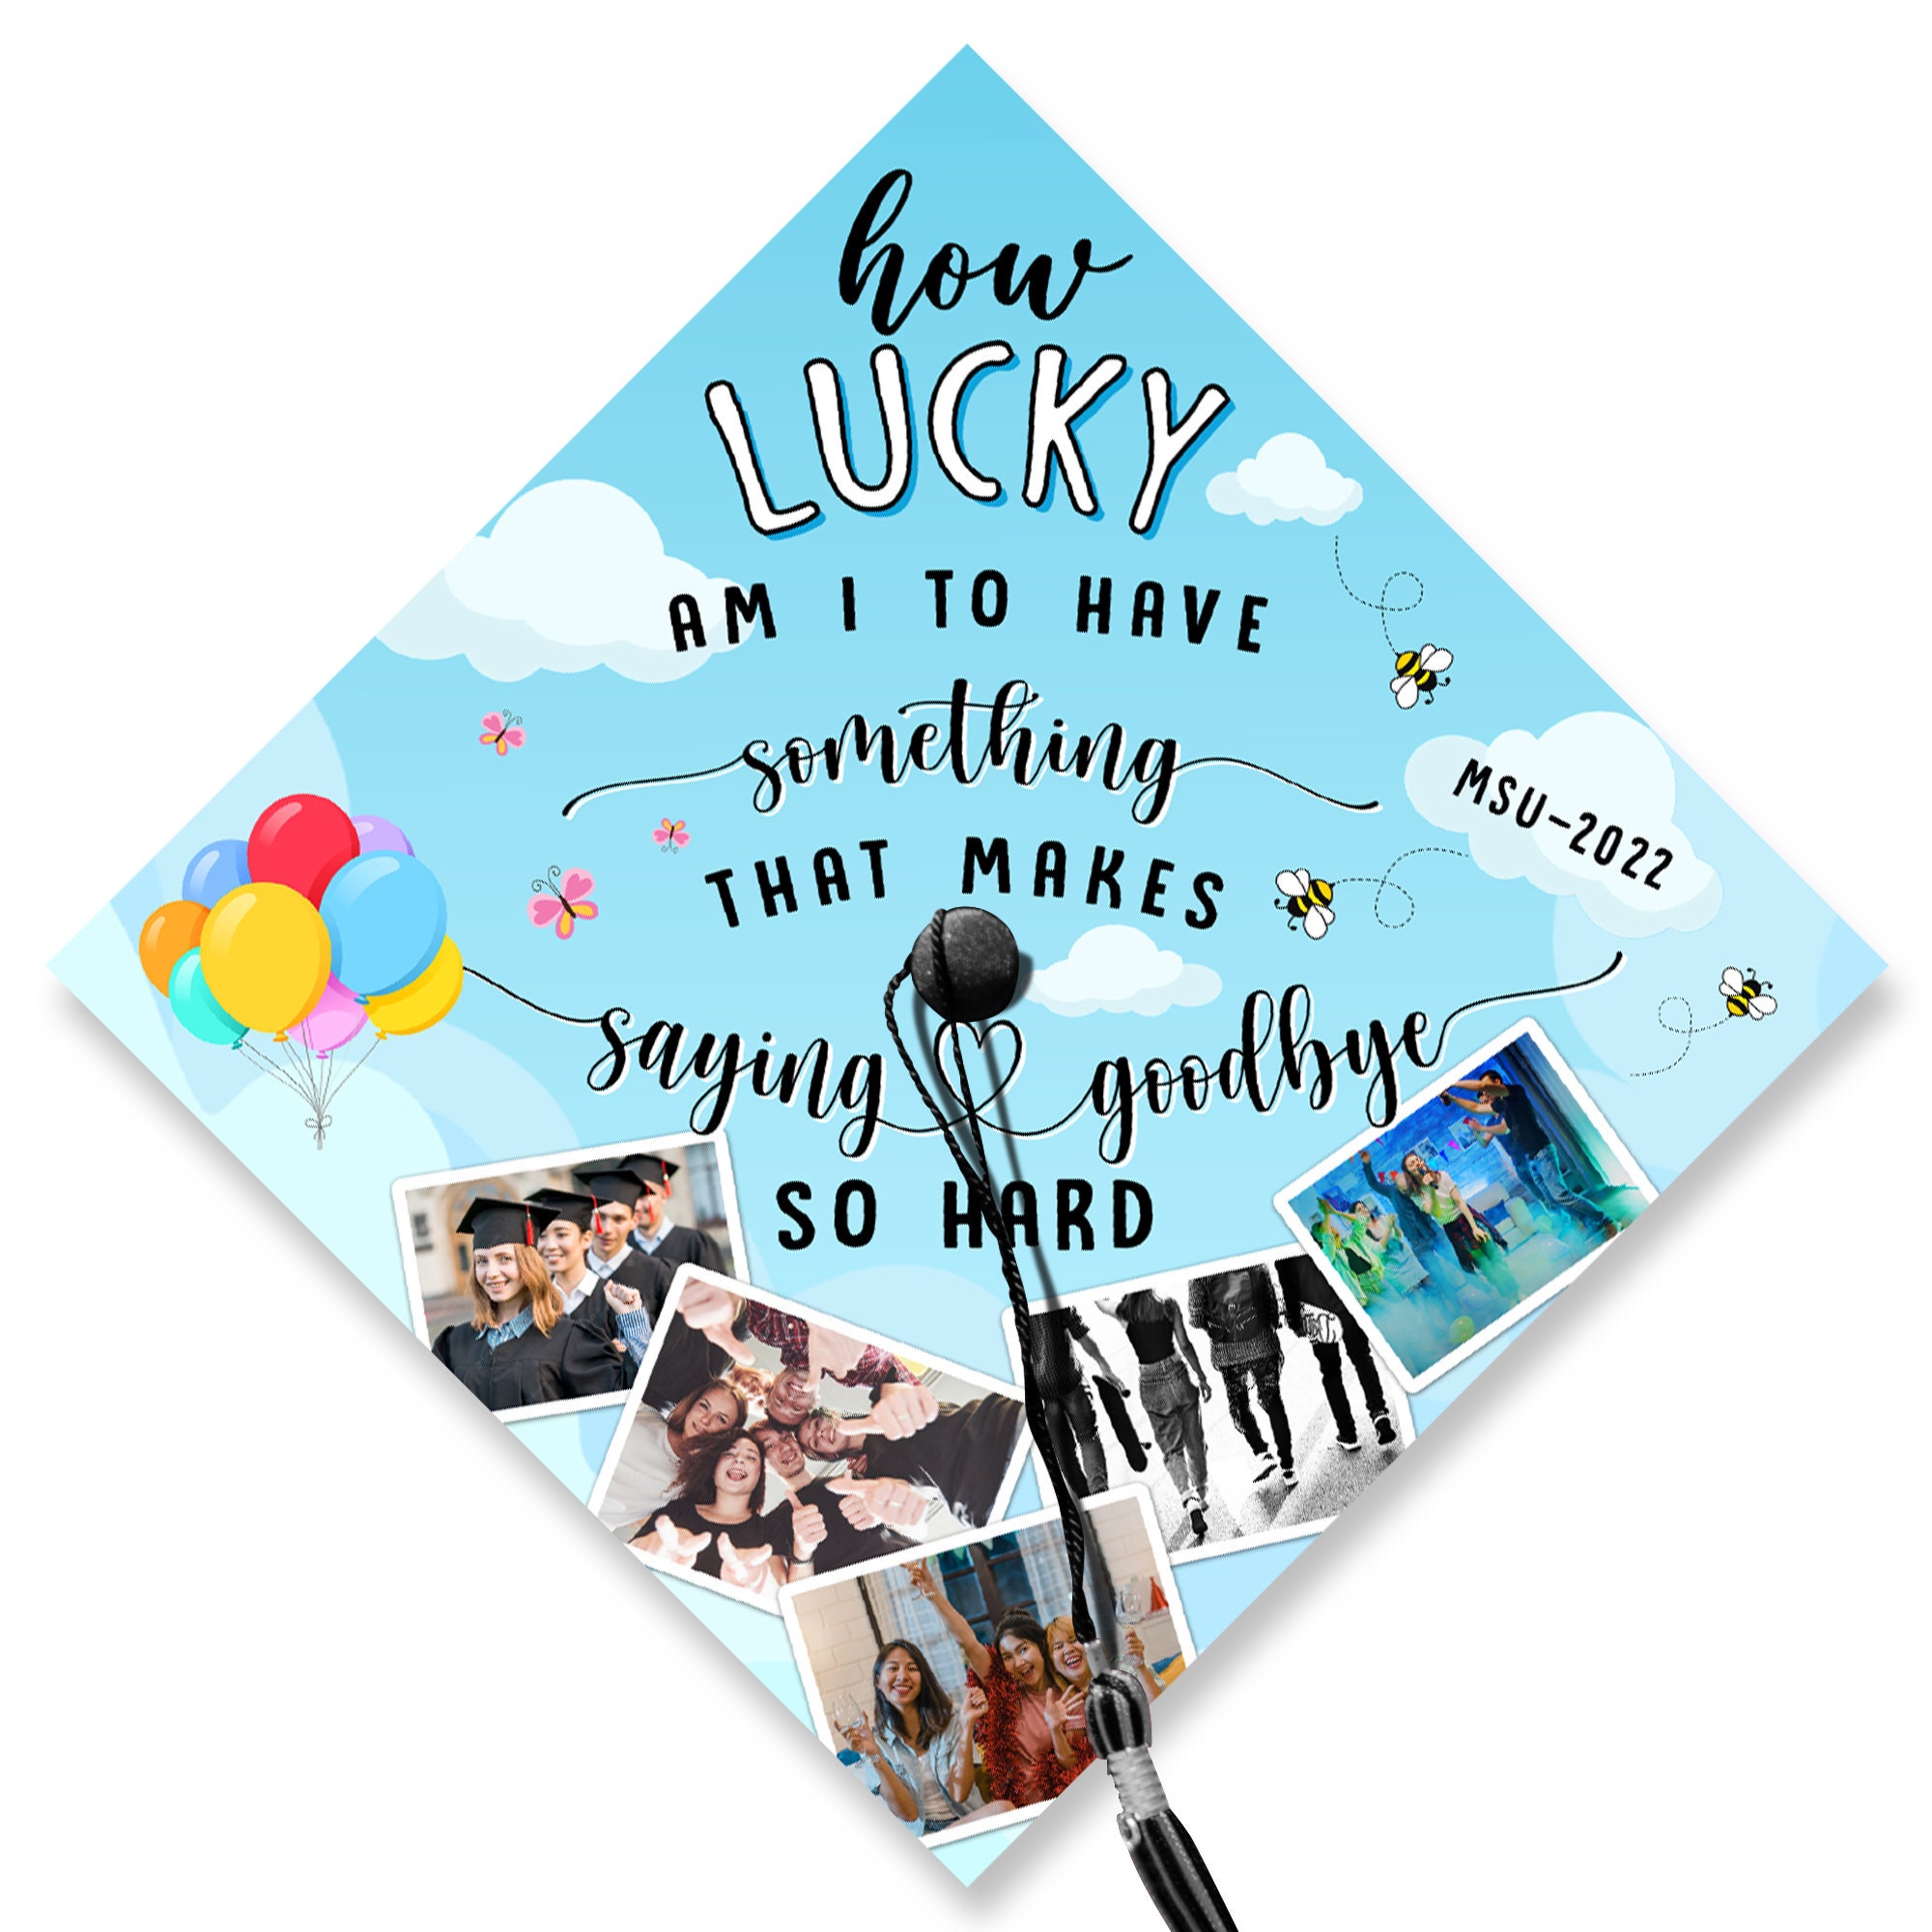 Customizable for any school colors! I can even add a Grad Cap to your  favorite disney character straw topper!! Visit my  shop to order…